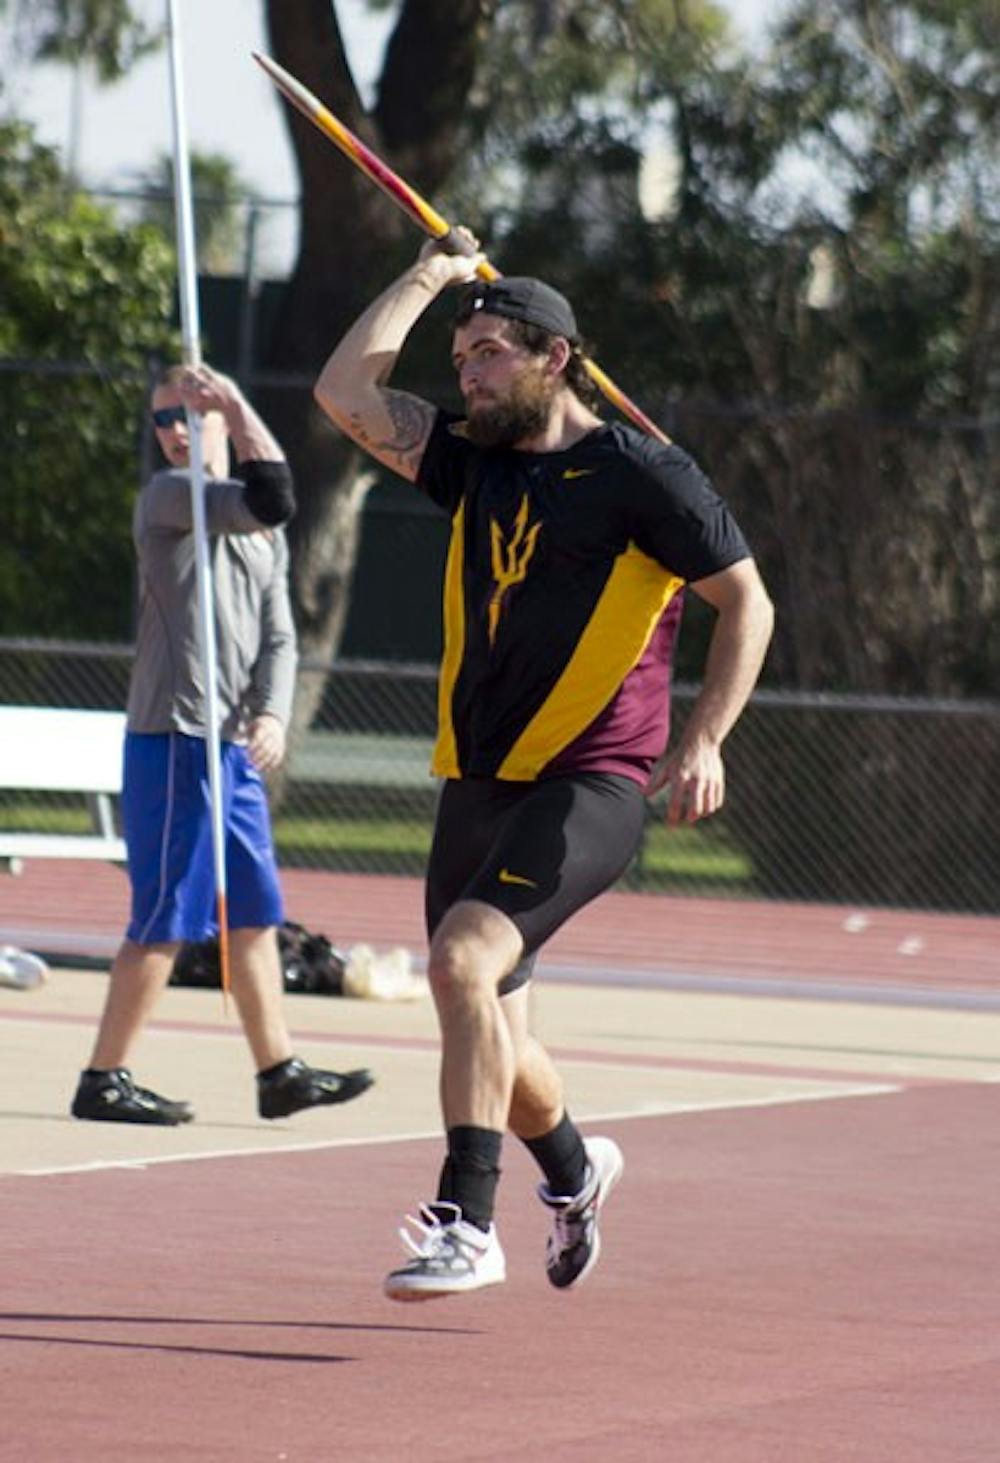 Senior thrower Eddie McClain gets set for a javelin throw during the ASU Invitational on March 23. McClain is part of a cohesive throwers unit whose bond has created success on the ASU track and field program. (Photo by Ana Ramirez)